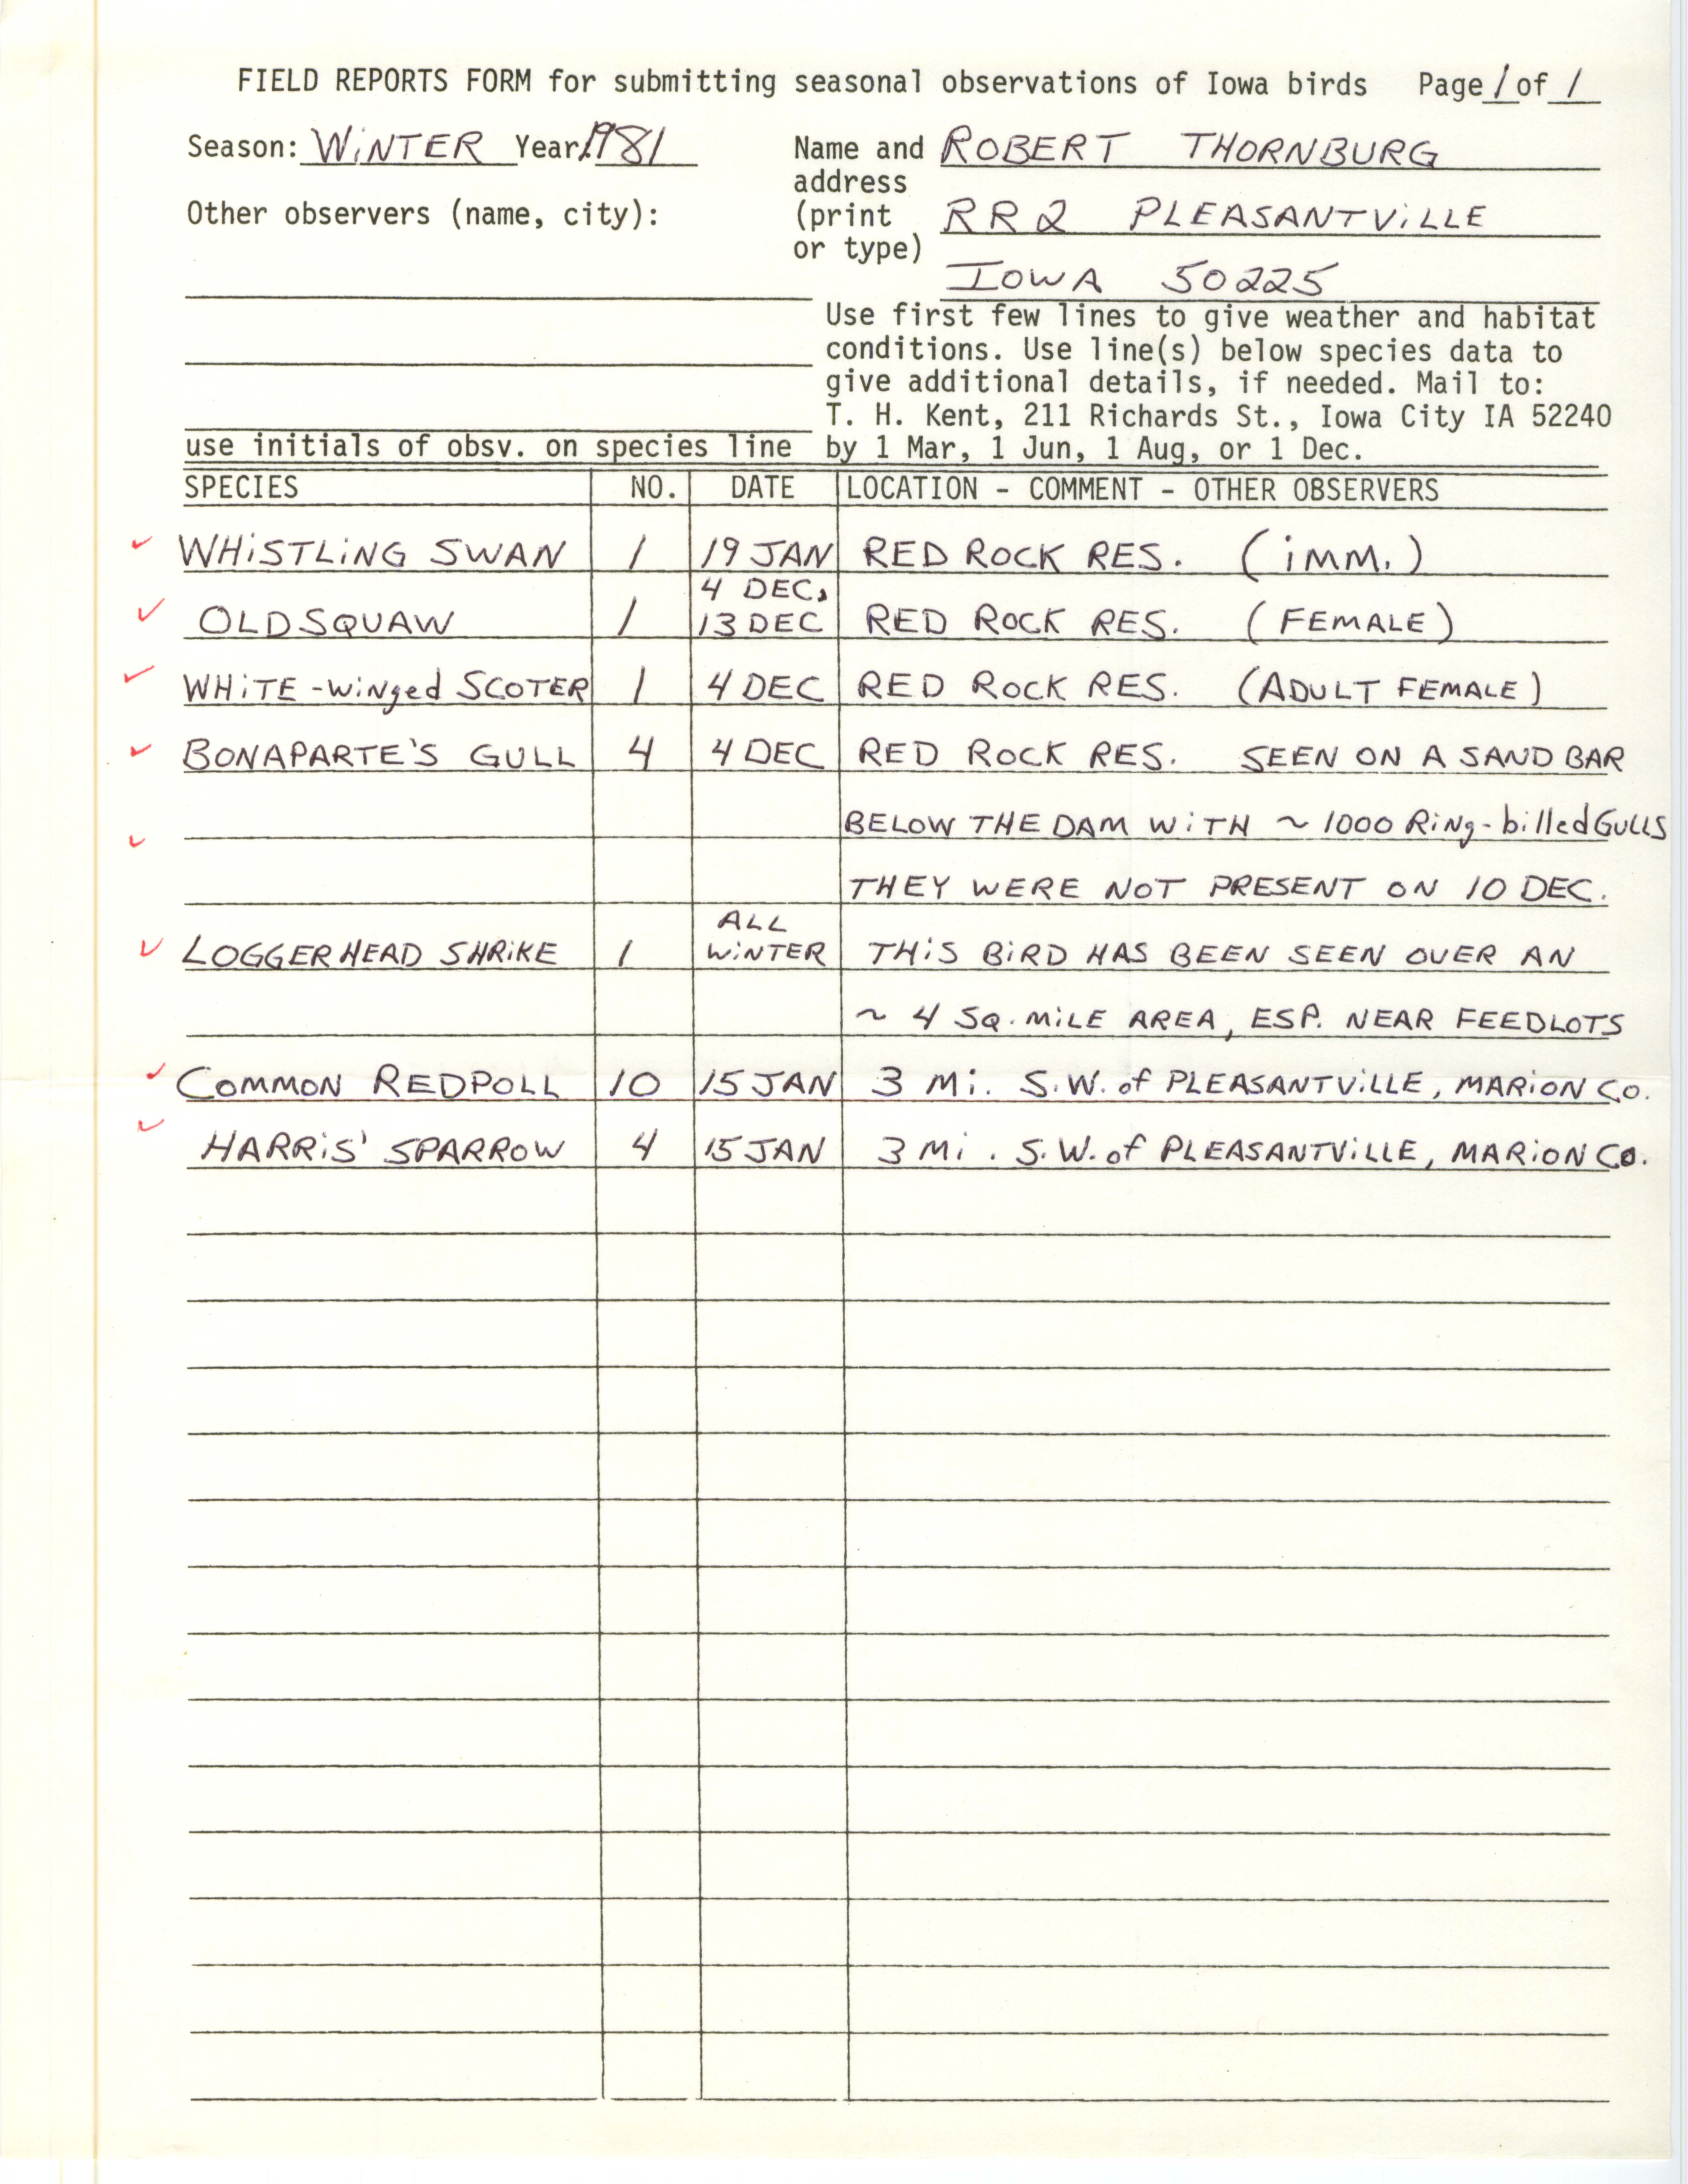 Field notes contributed by Robert E. Thornburg, winter 1981-1982